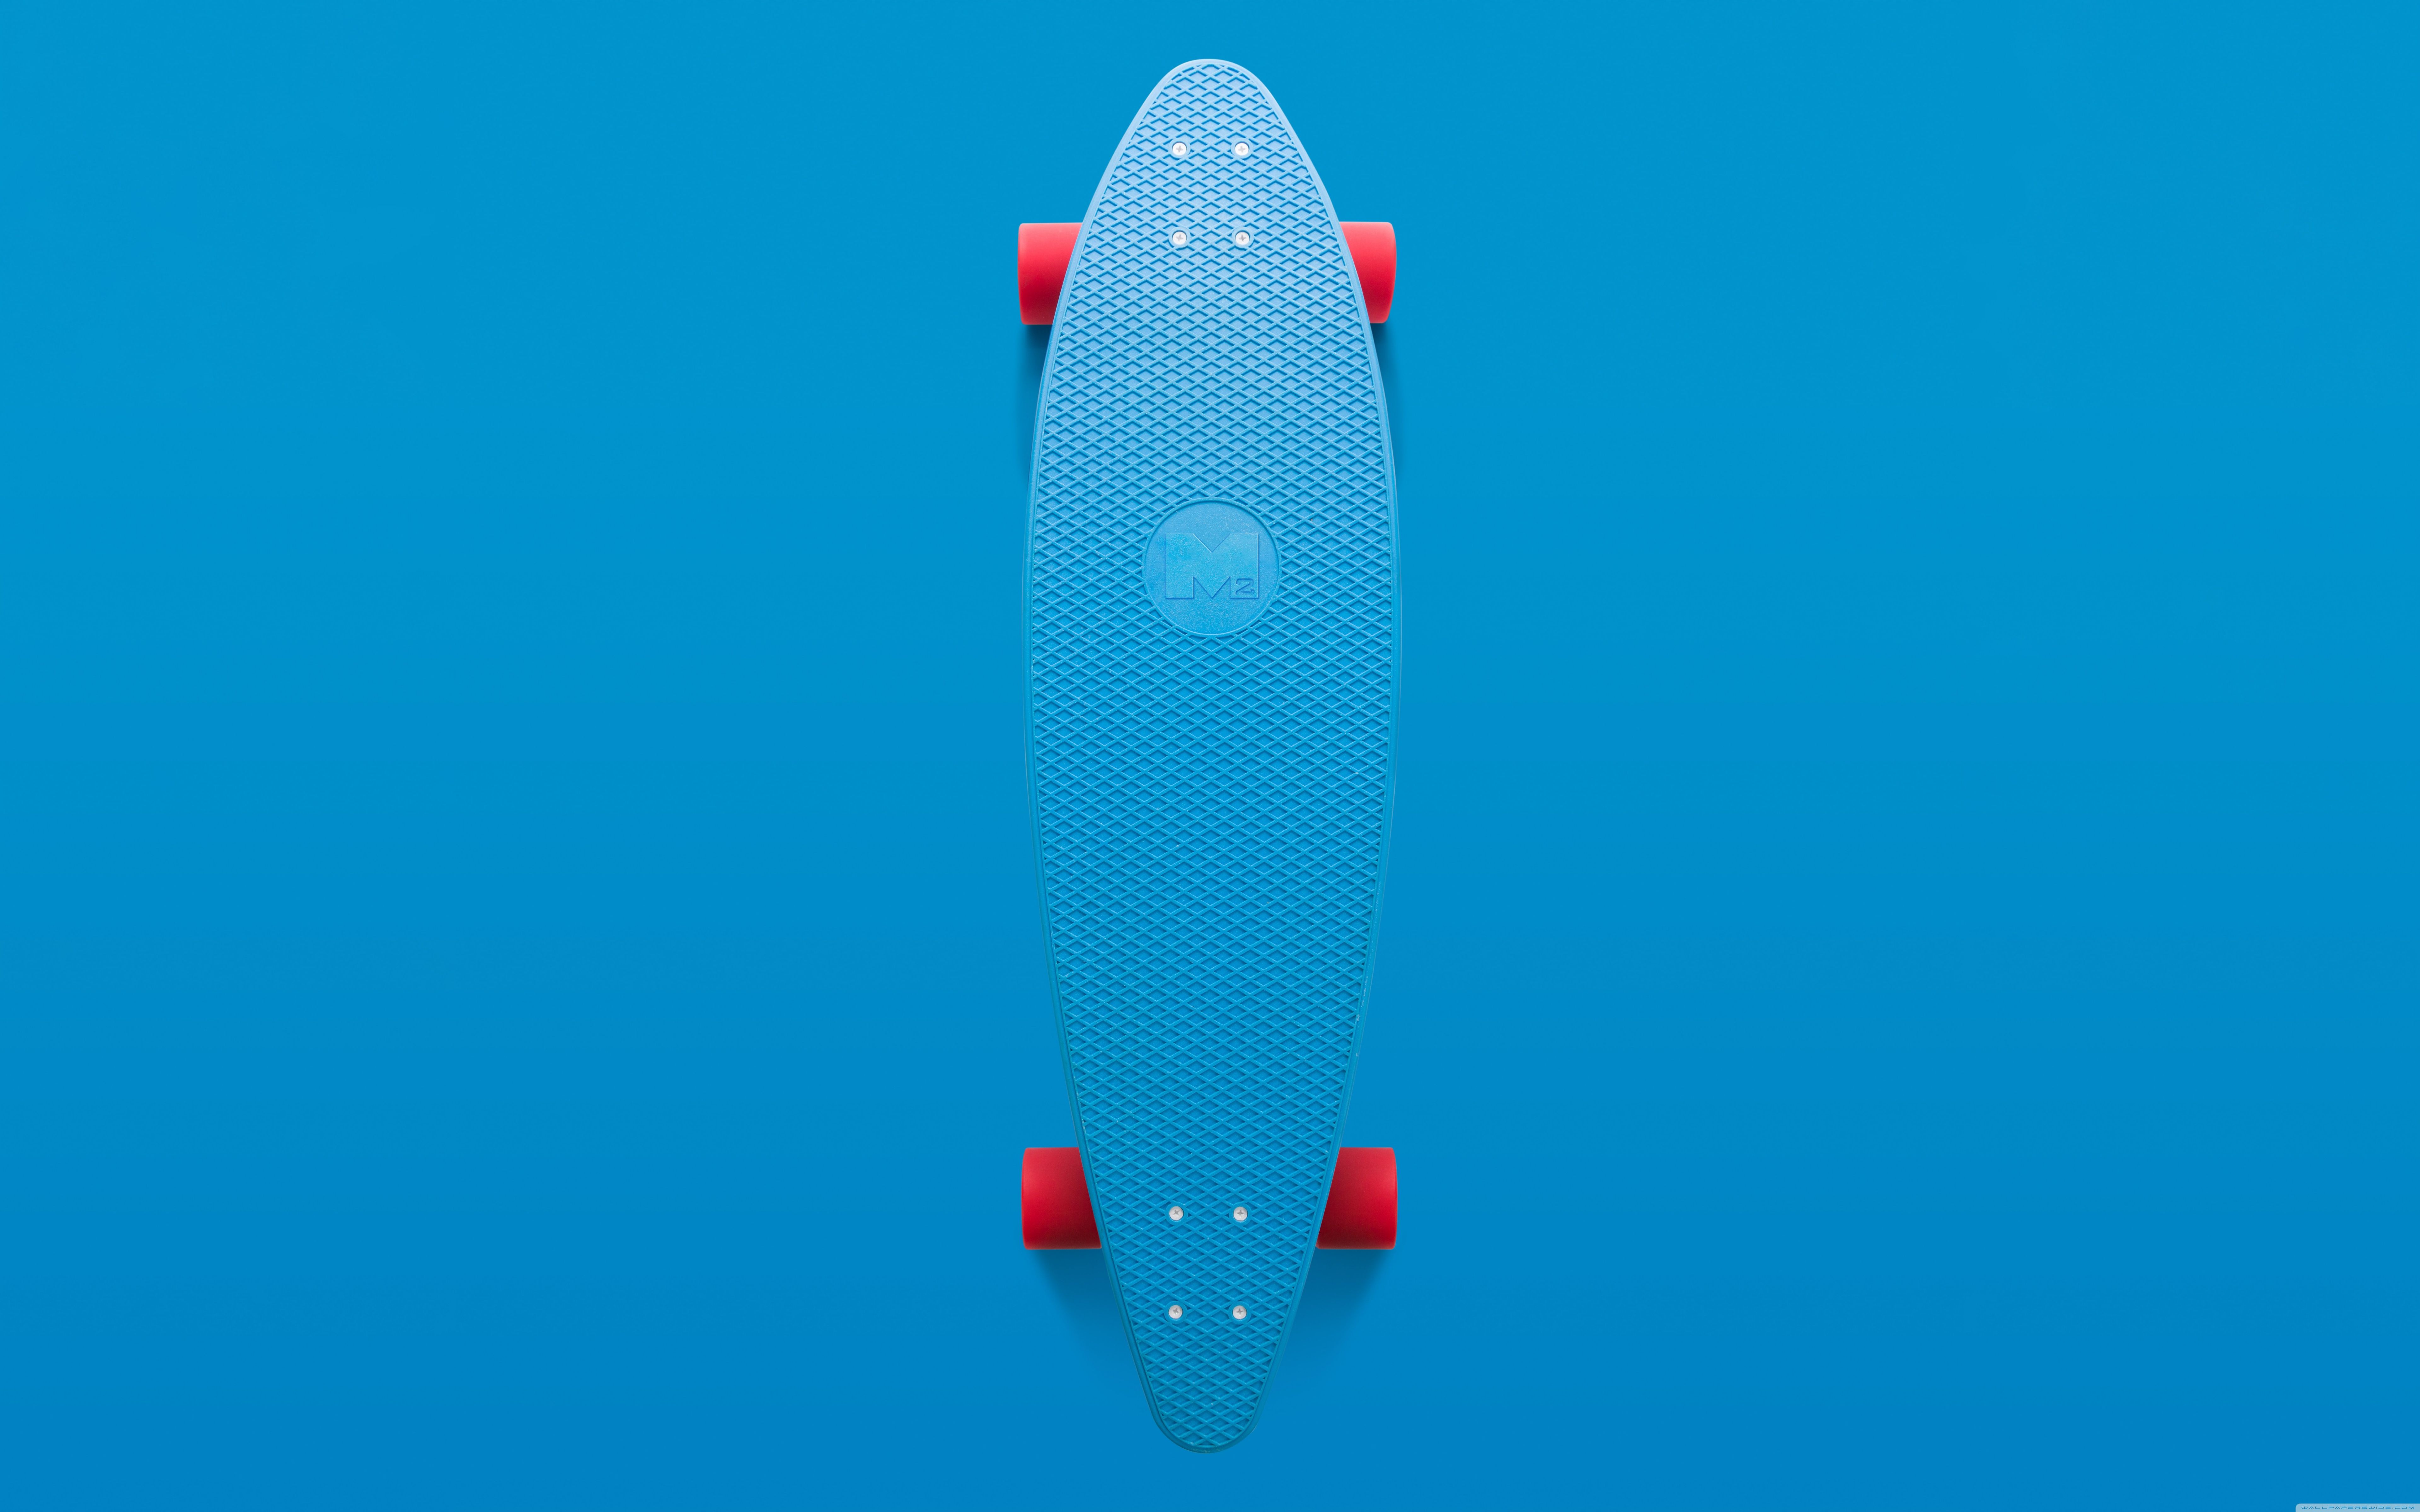 A blue skateboard with red wheels on a blue background - Skater